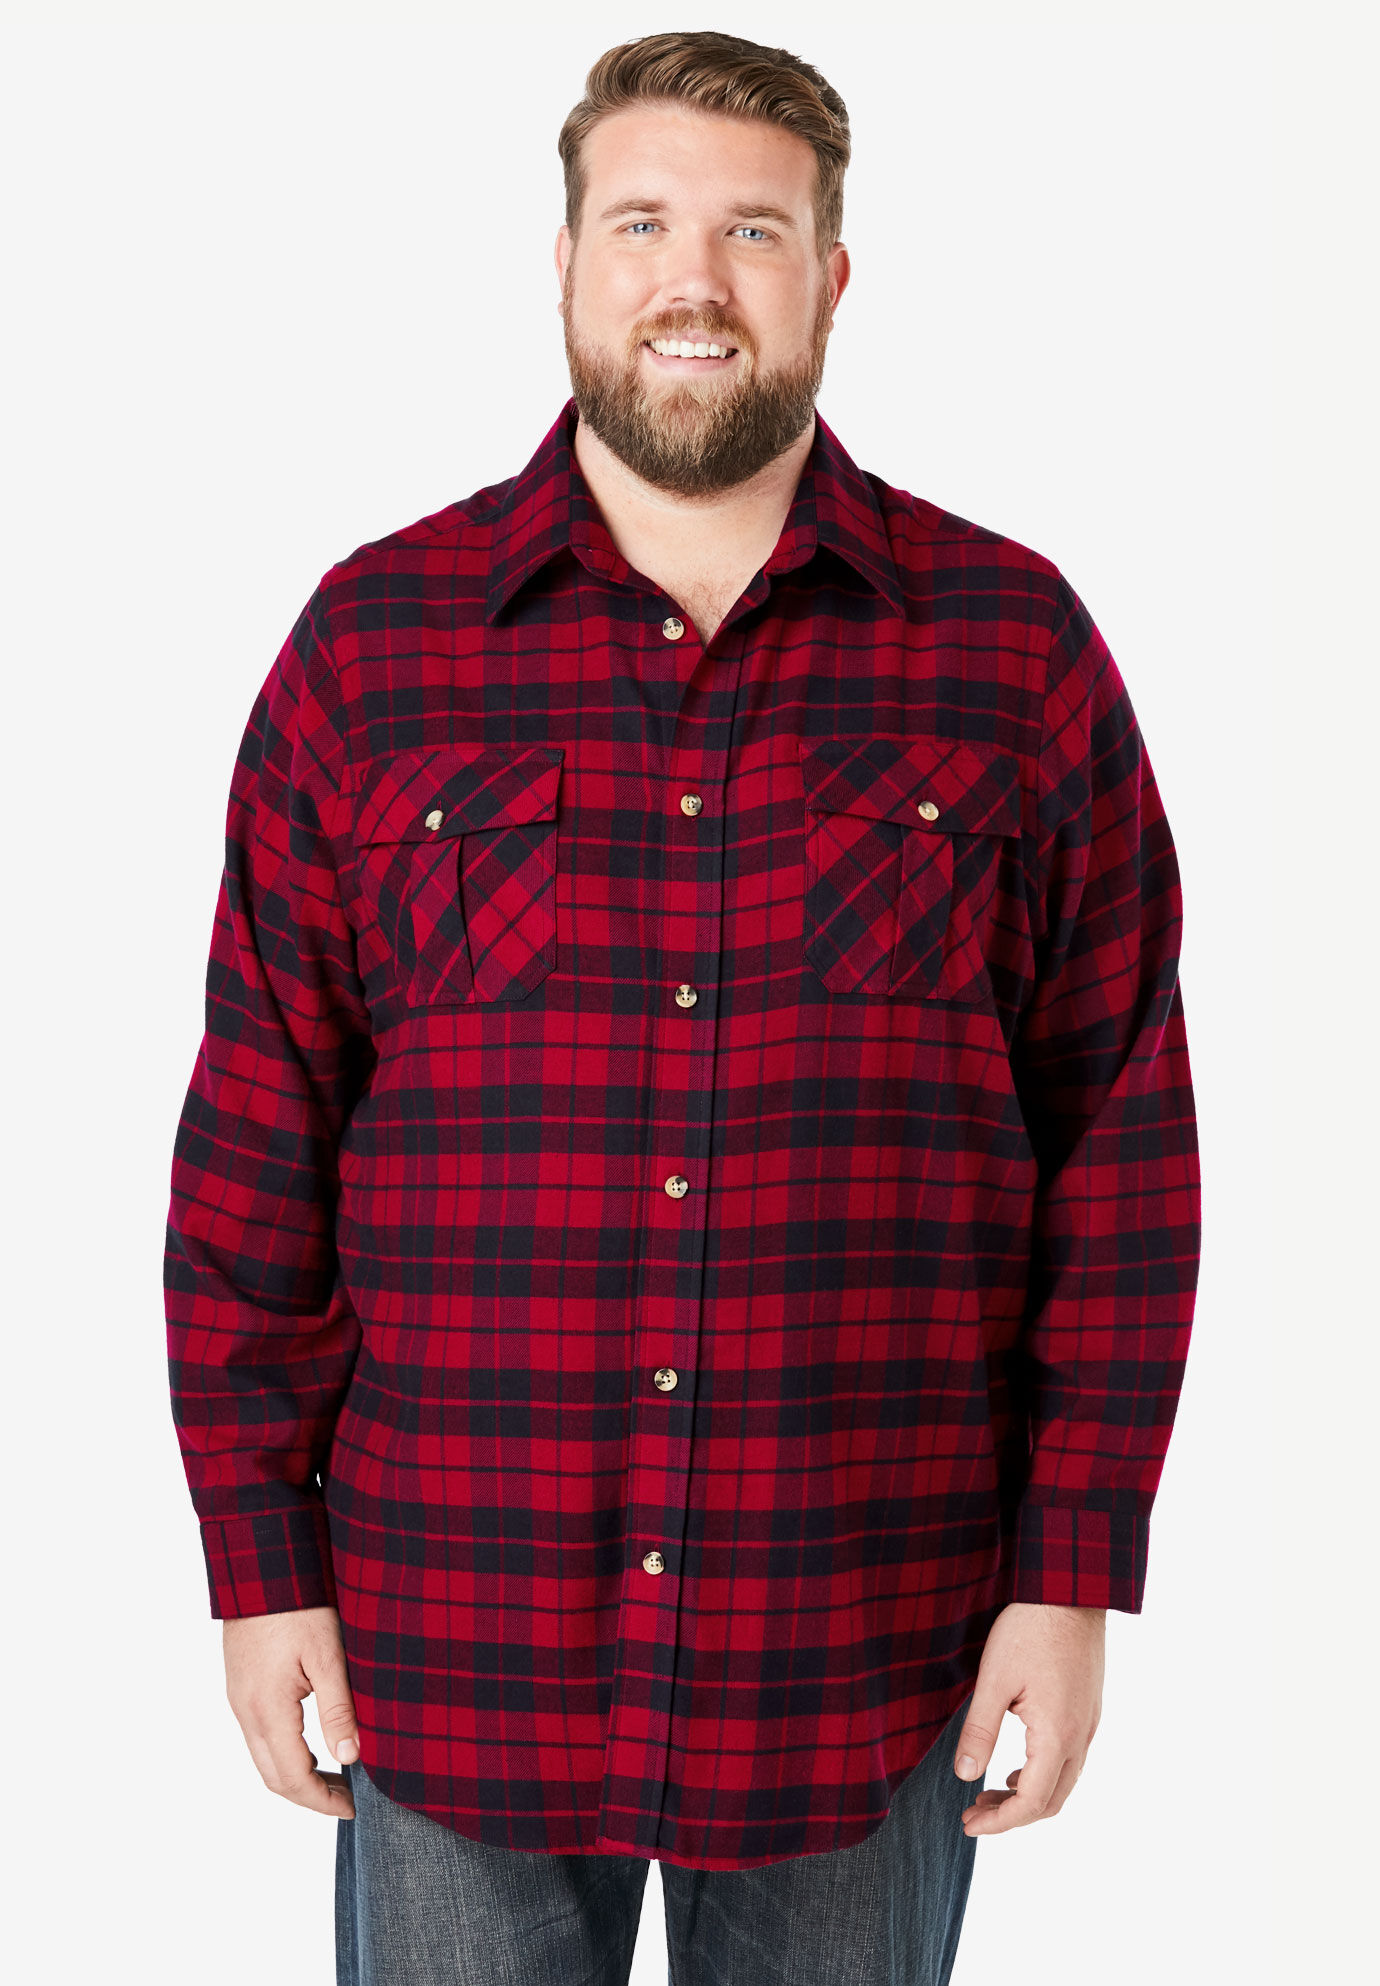 Big and Tall Clothing for Men | King Size